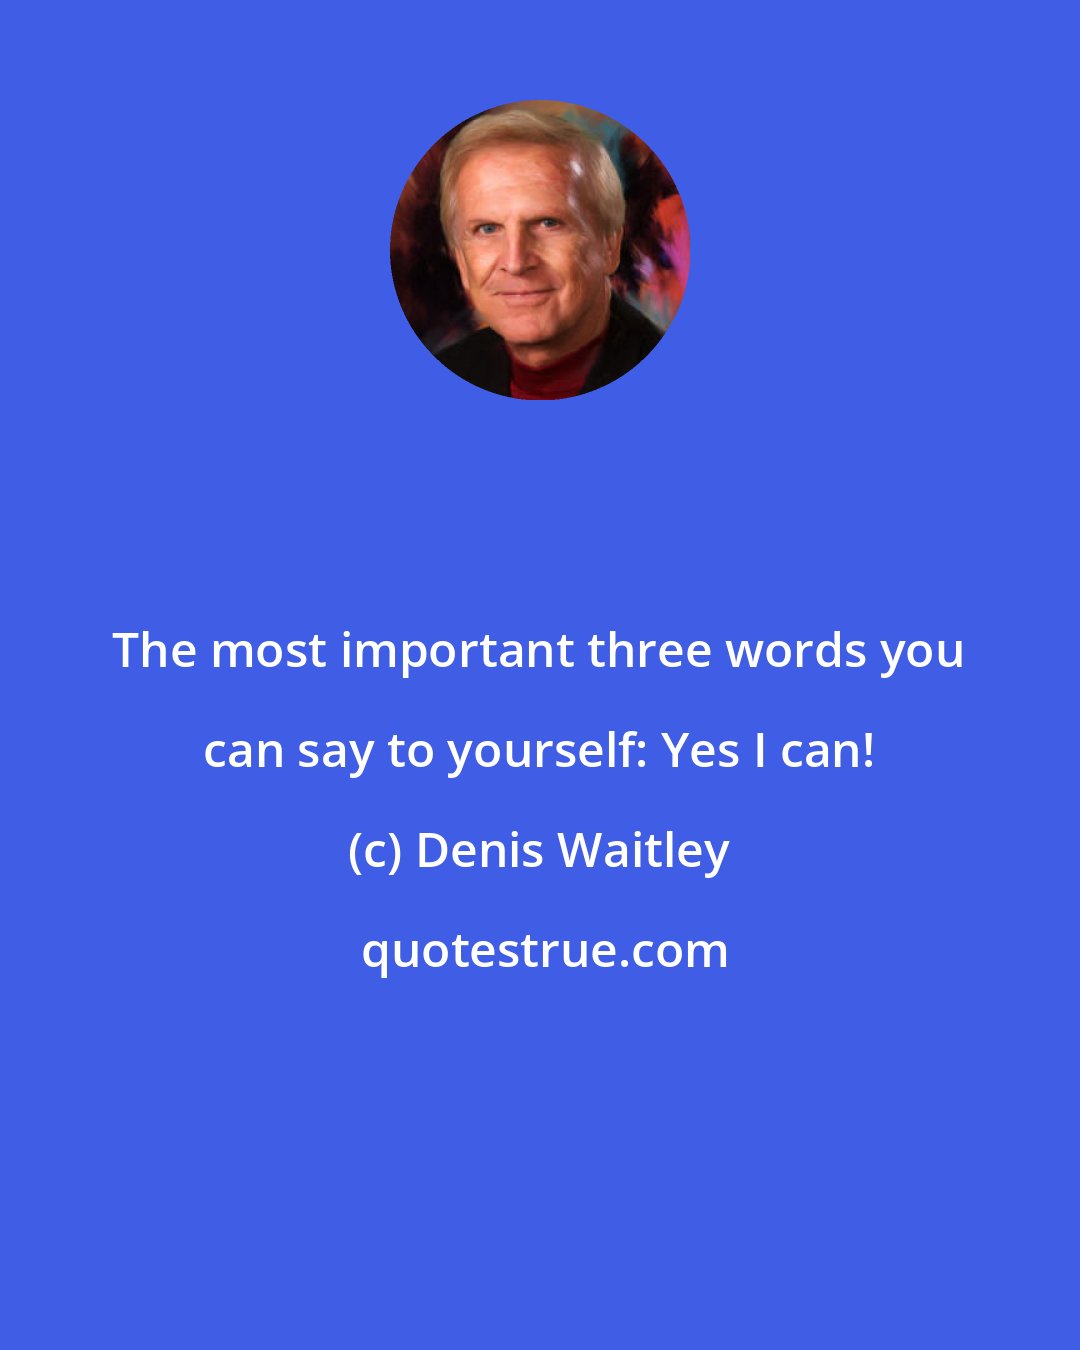 Denis Waitley: The most important three words you can say to yourself: Yes I can!